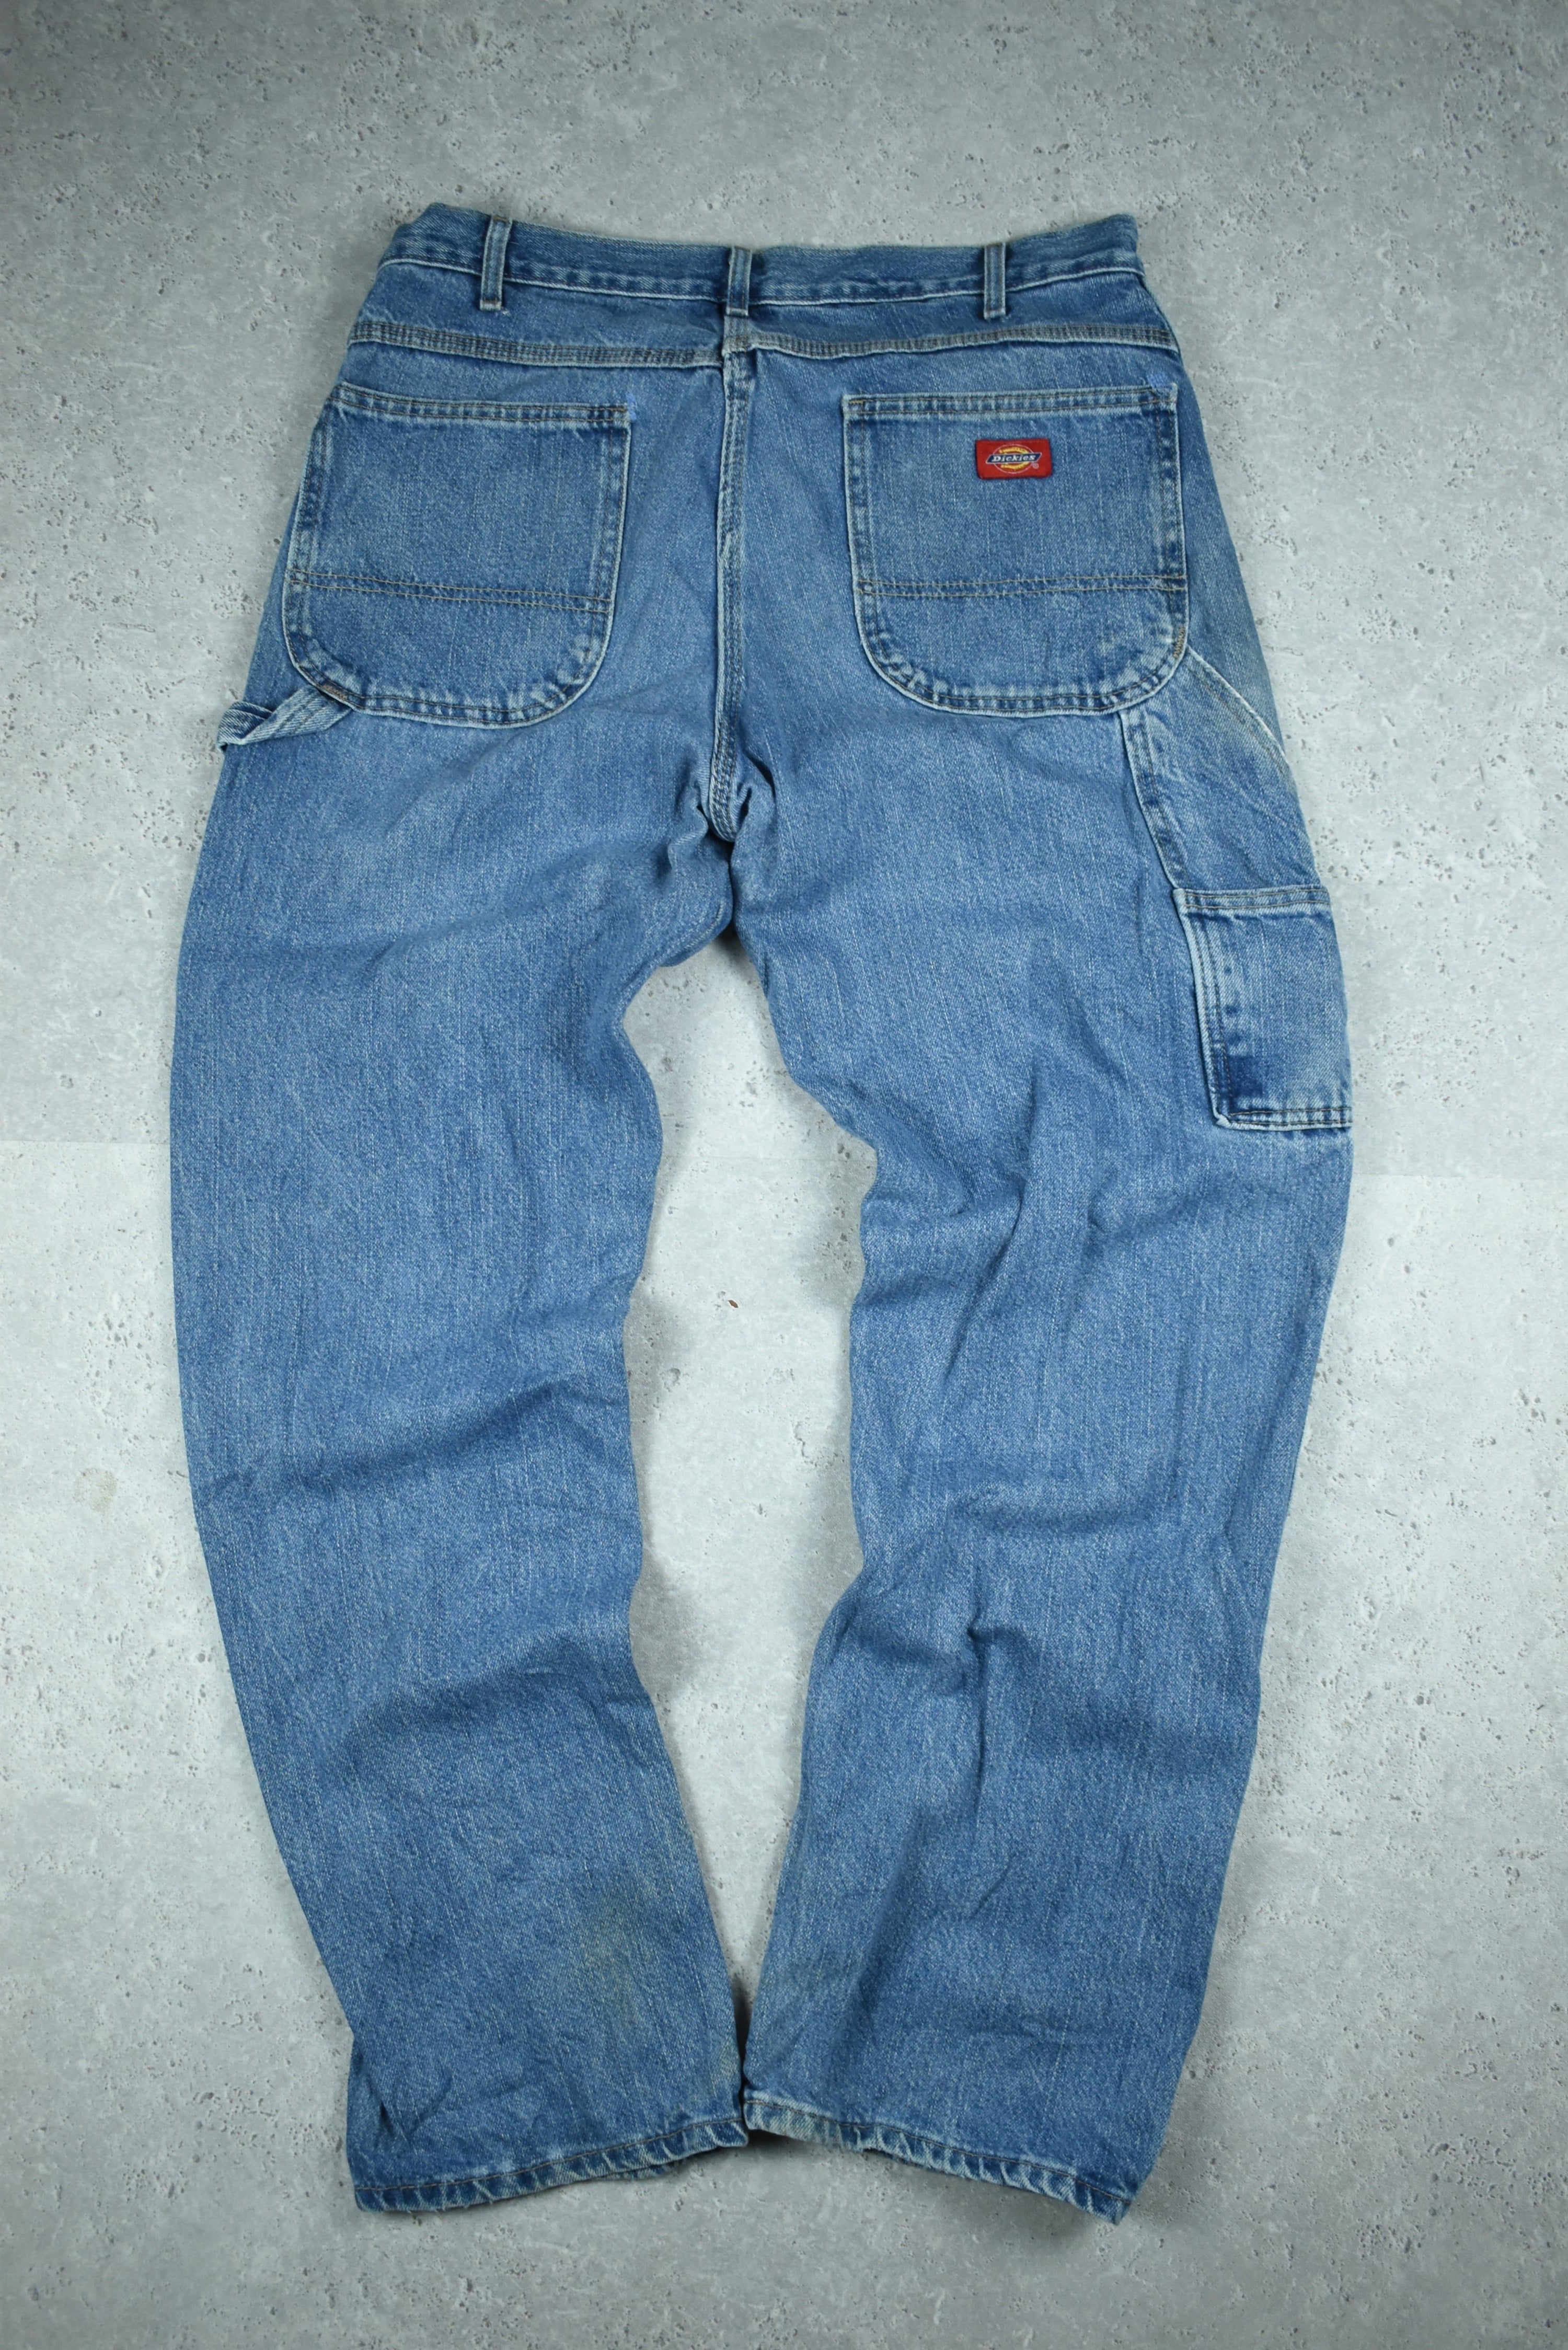 Vintage Dickies Relaxed Fit Denim Jeans 34x32